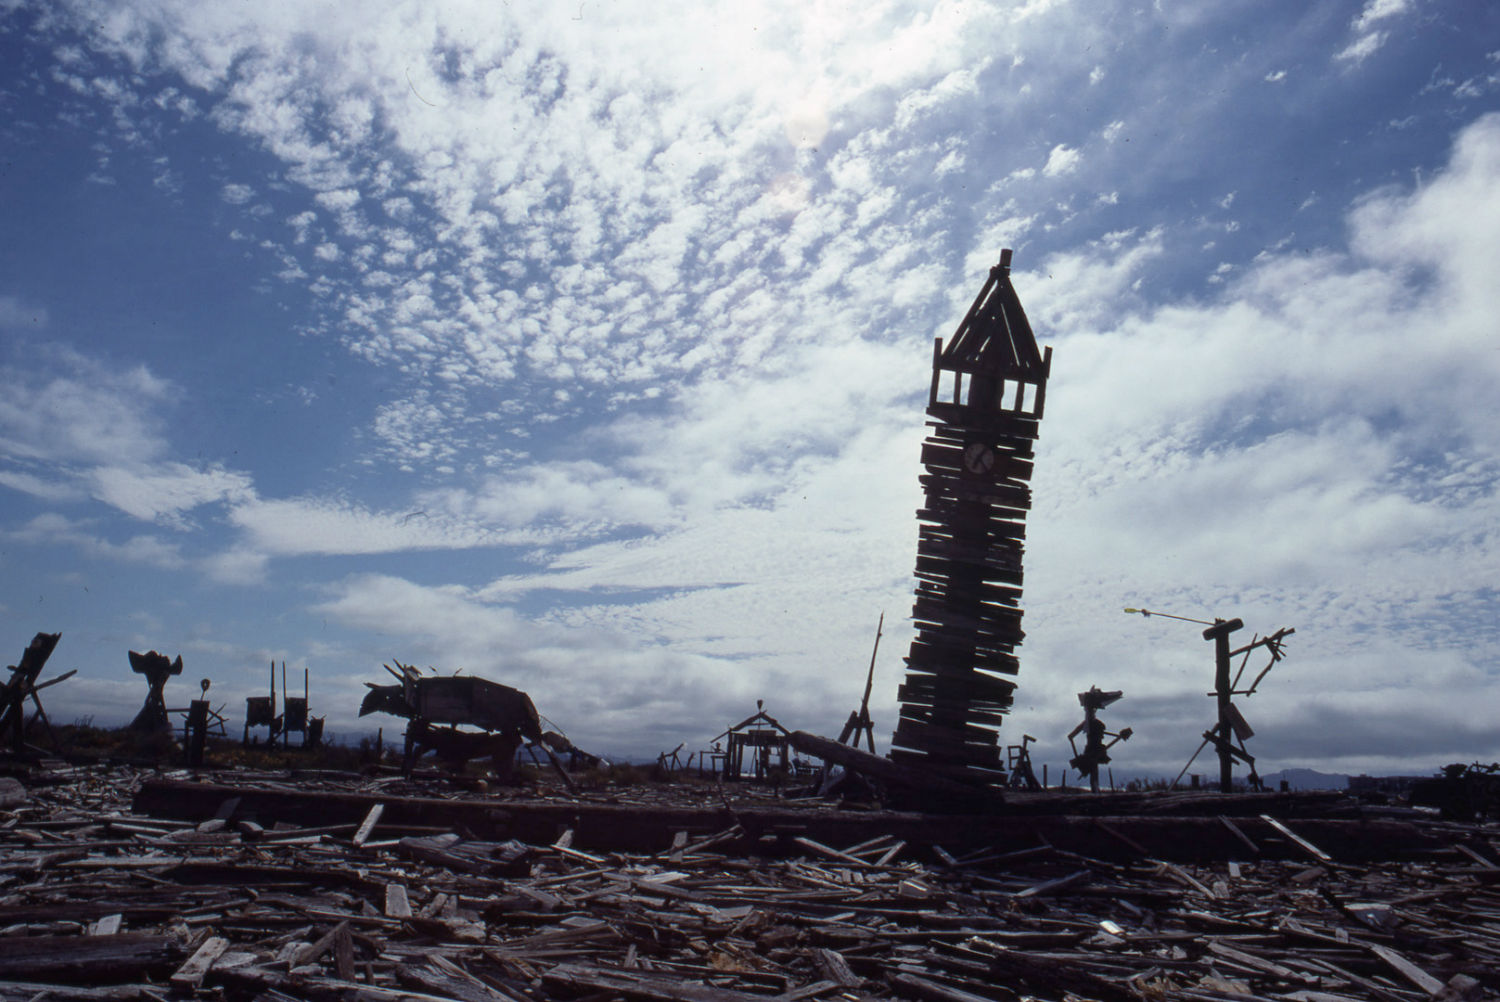 Robert Sommer: Emeryville Mudflats, c. 1960s-70s; digital image from slide; courtesy of the California College of the Arts, San Francisco, The Sommer Collection. © CCA/C Archives at California College of the Arts Libraries, San Francisco, California. Photographs by Robert Sommer.